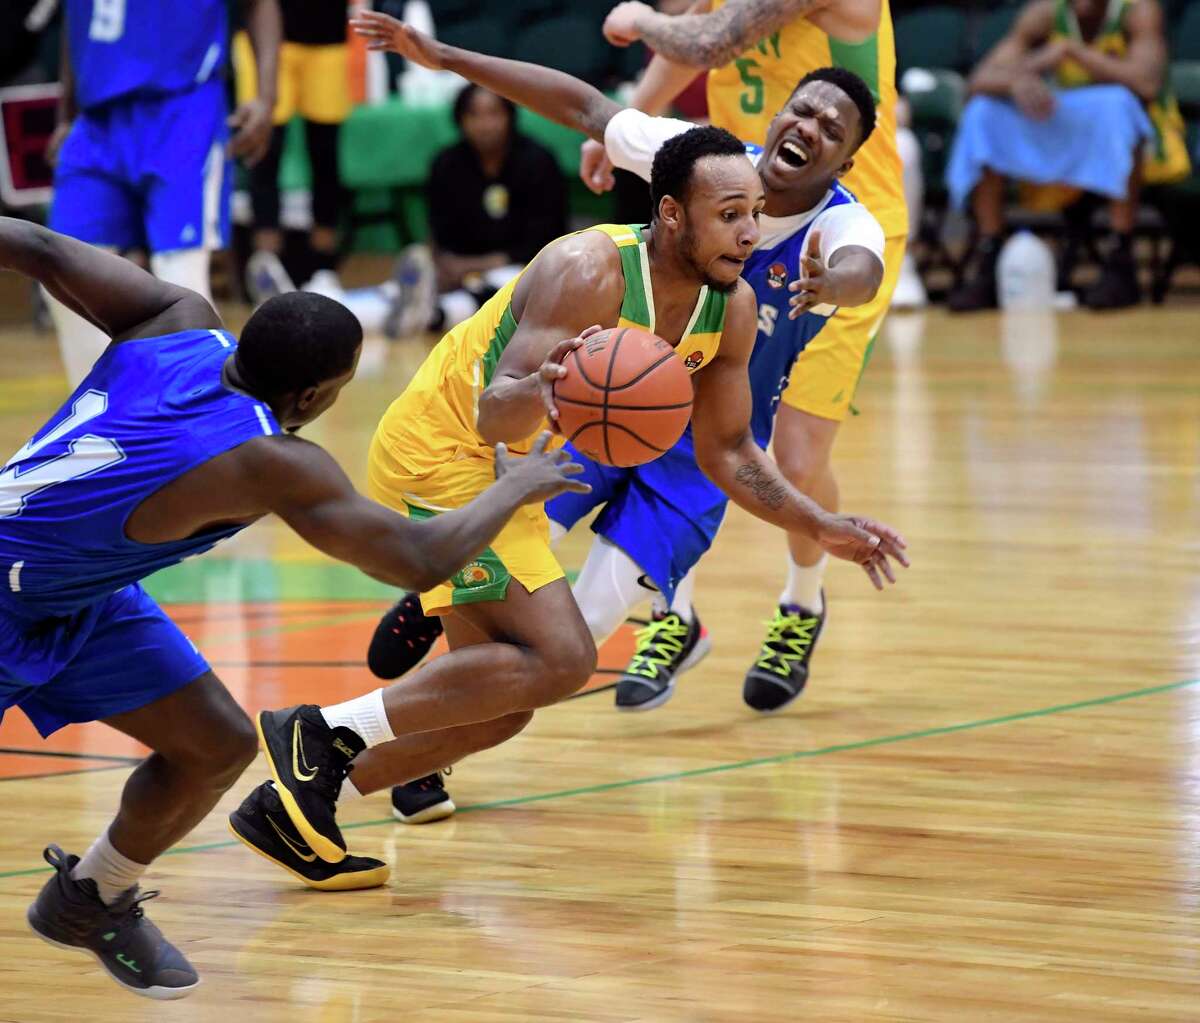 Albany Patroons' Shadell Mullinghaus (center) moves the ball past Jamestown Jackals players Austin Hamilton (11) and Corey Wilford in the first half of their The Basketball League basketball game in Albany, N.Y., Sunday, April 7, 2019.